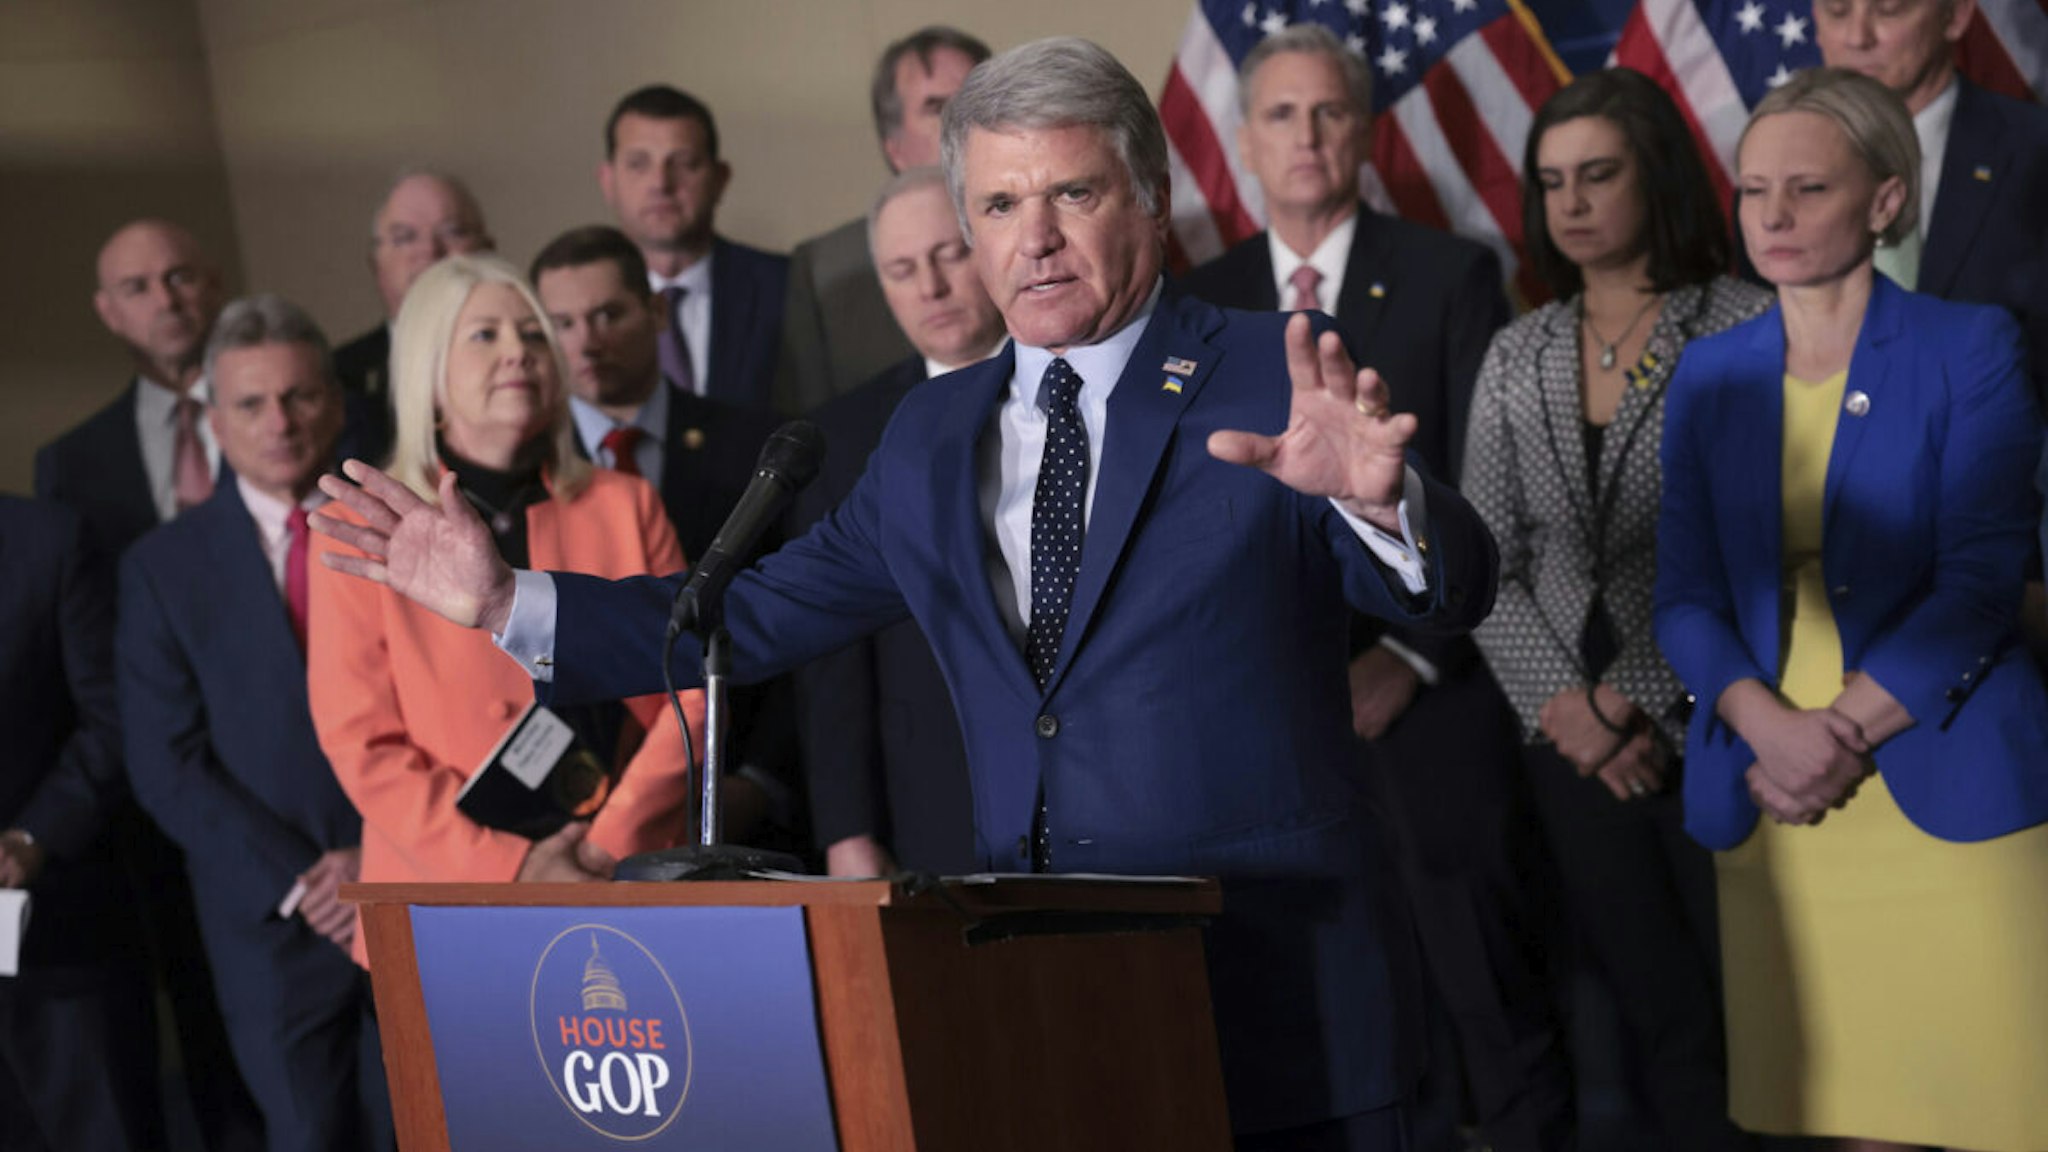 Rep. Rep. Michael McCaul (R-TX) speaks during a press conference on the State of the Union speech to be delivered by U.S. President Joe Biden later this evening on March 01, 2022 in Washington, DC. Ukrainian born Rep. Victoria Spartz (R-IN) delivered an emotional appeal for further U.S. support for Ukraine during the press conference.